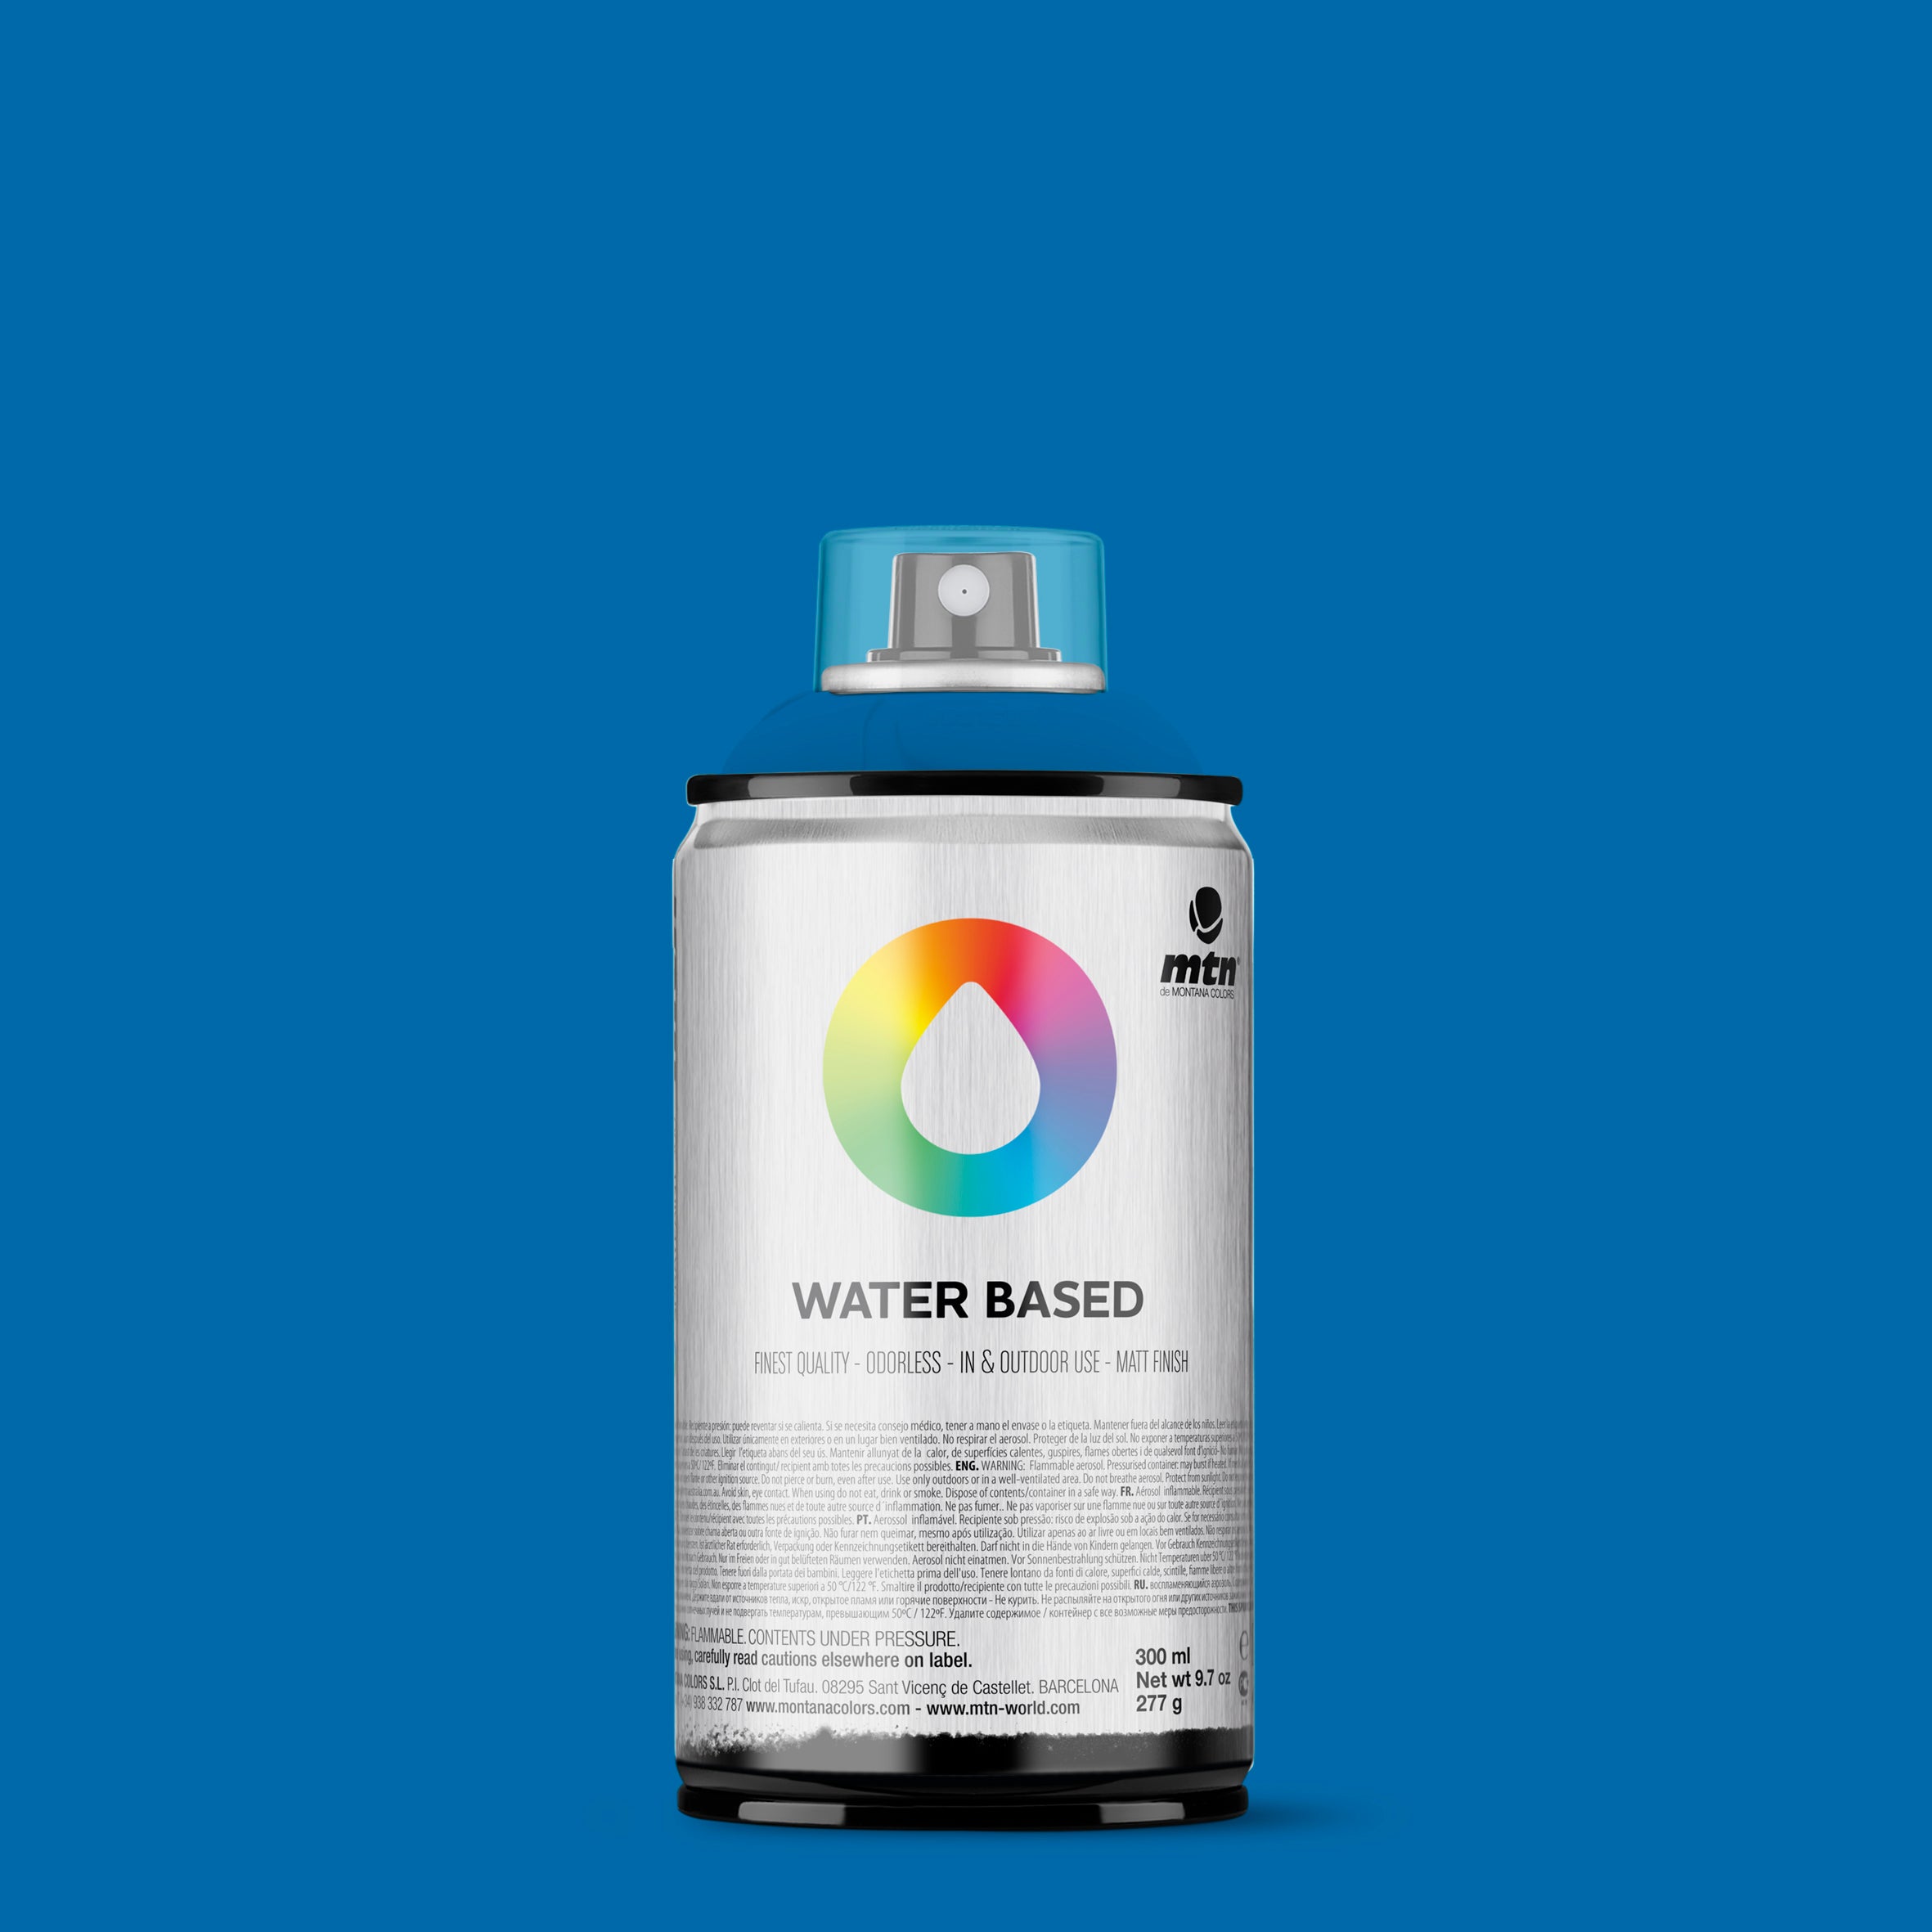 Montana Water Based Spray Paint Review